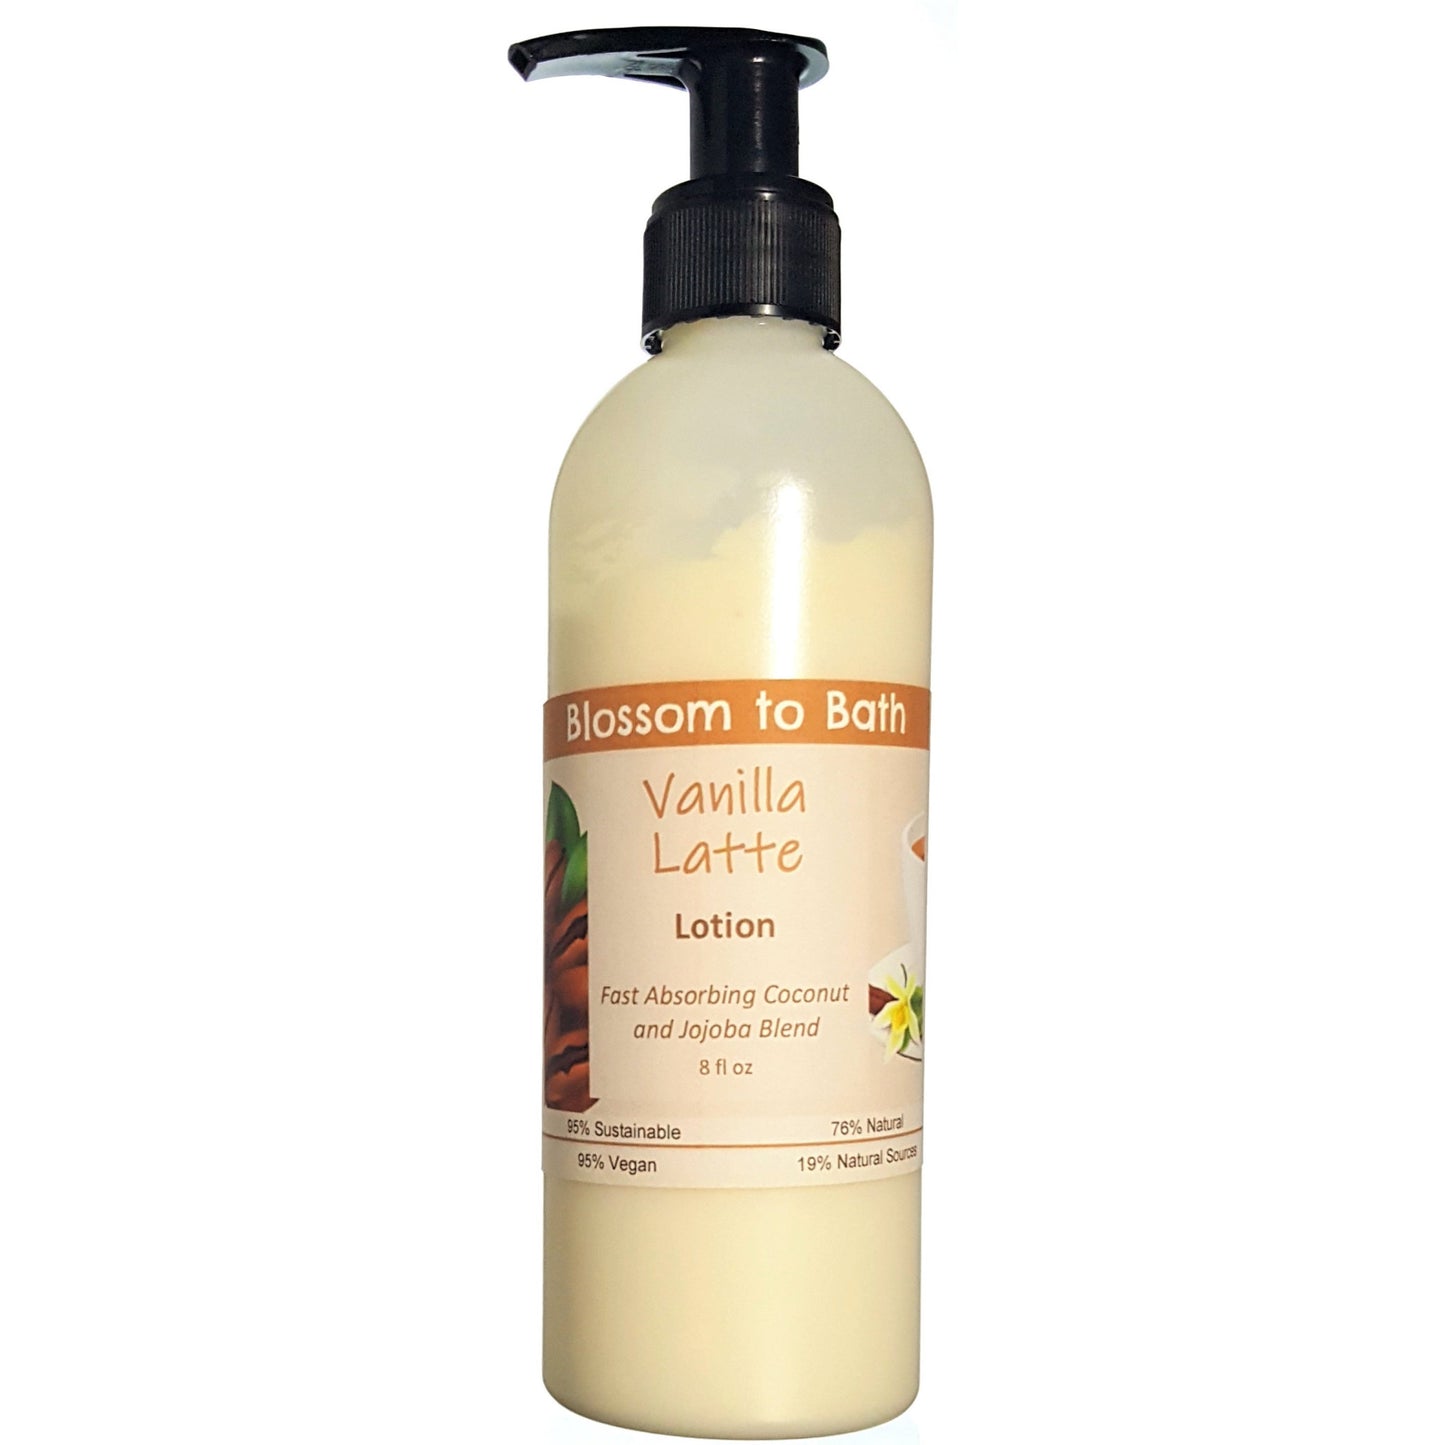 Buy Blossom to Bath Vanilla Latte Lotion from Flowersong Soap Studio.  Daily moisture  that soaks in quickly made with organic oils and butters that soften and smooth the skin  Sweetened vanilla combines with rich coffee to form the classic latte scent.